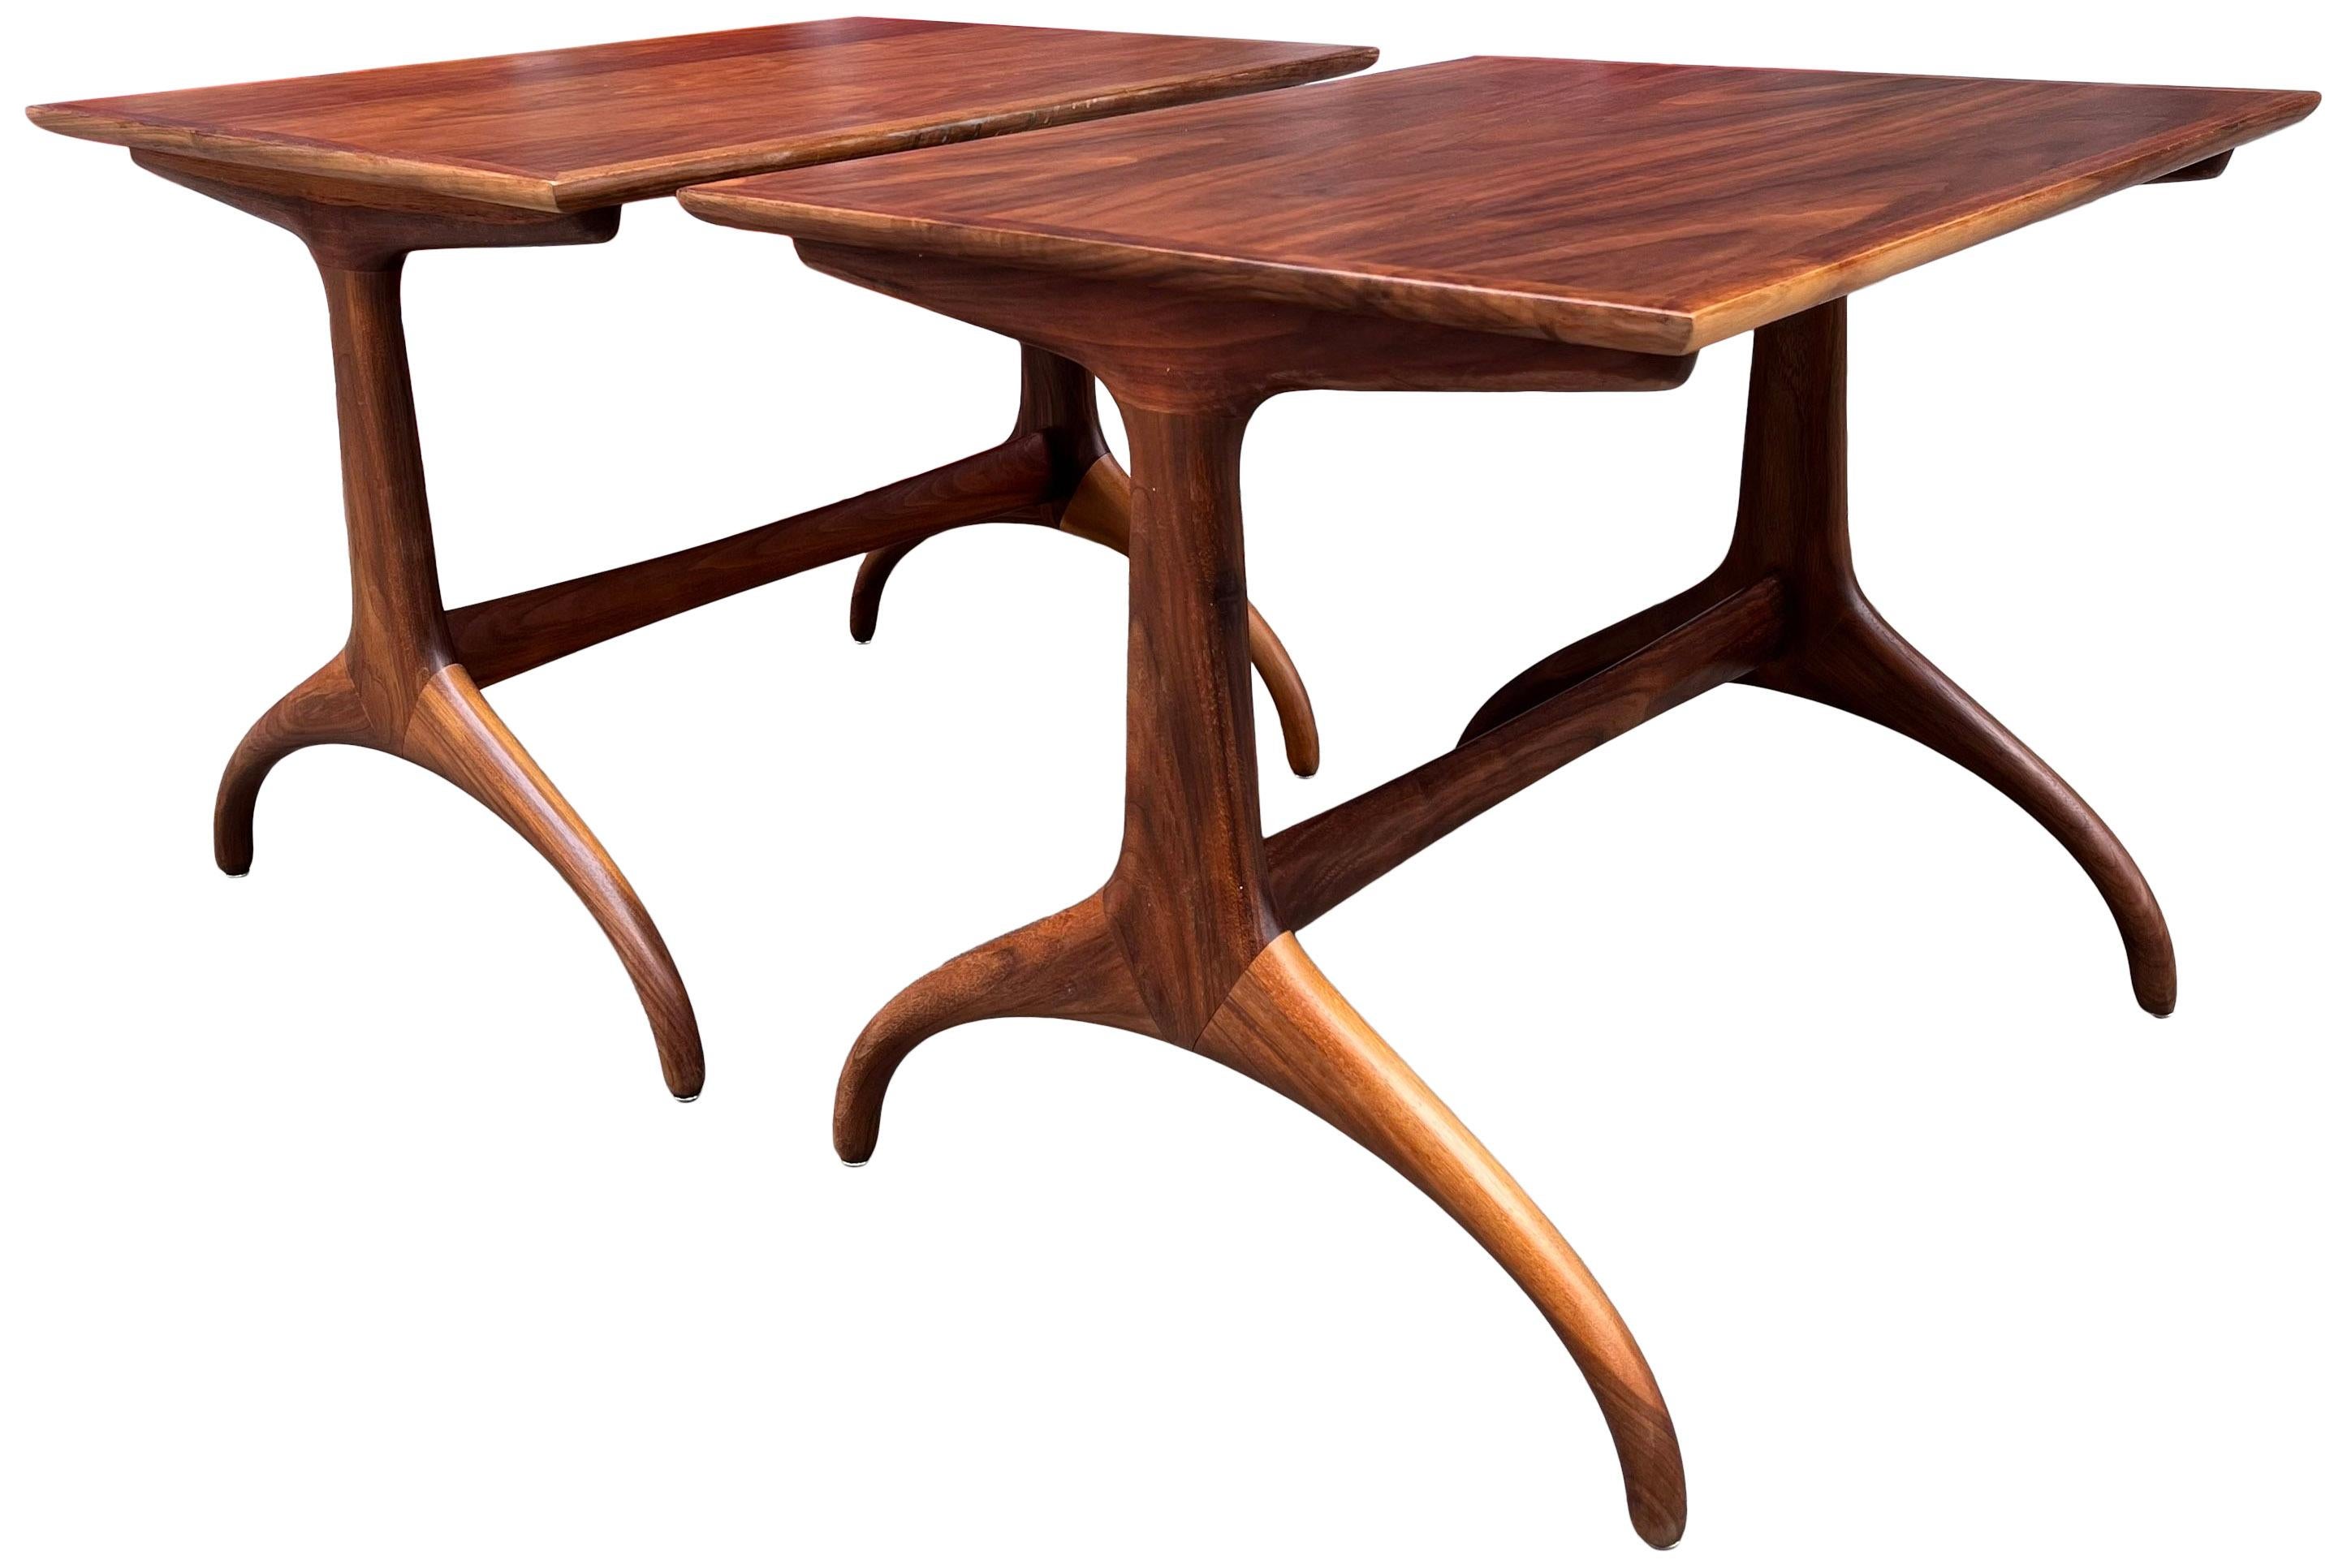 Gorgeous and classic mid-century wishbone style tables by Henredon furniture produced in the late 40's early 50's. Comprised on walnut and in wonderful condition. The table proportions make it versatile as it can be used as bedside table, end